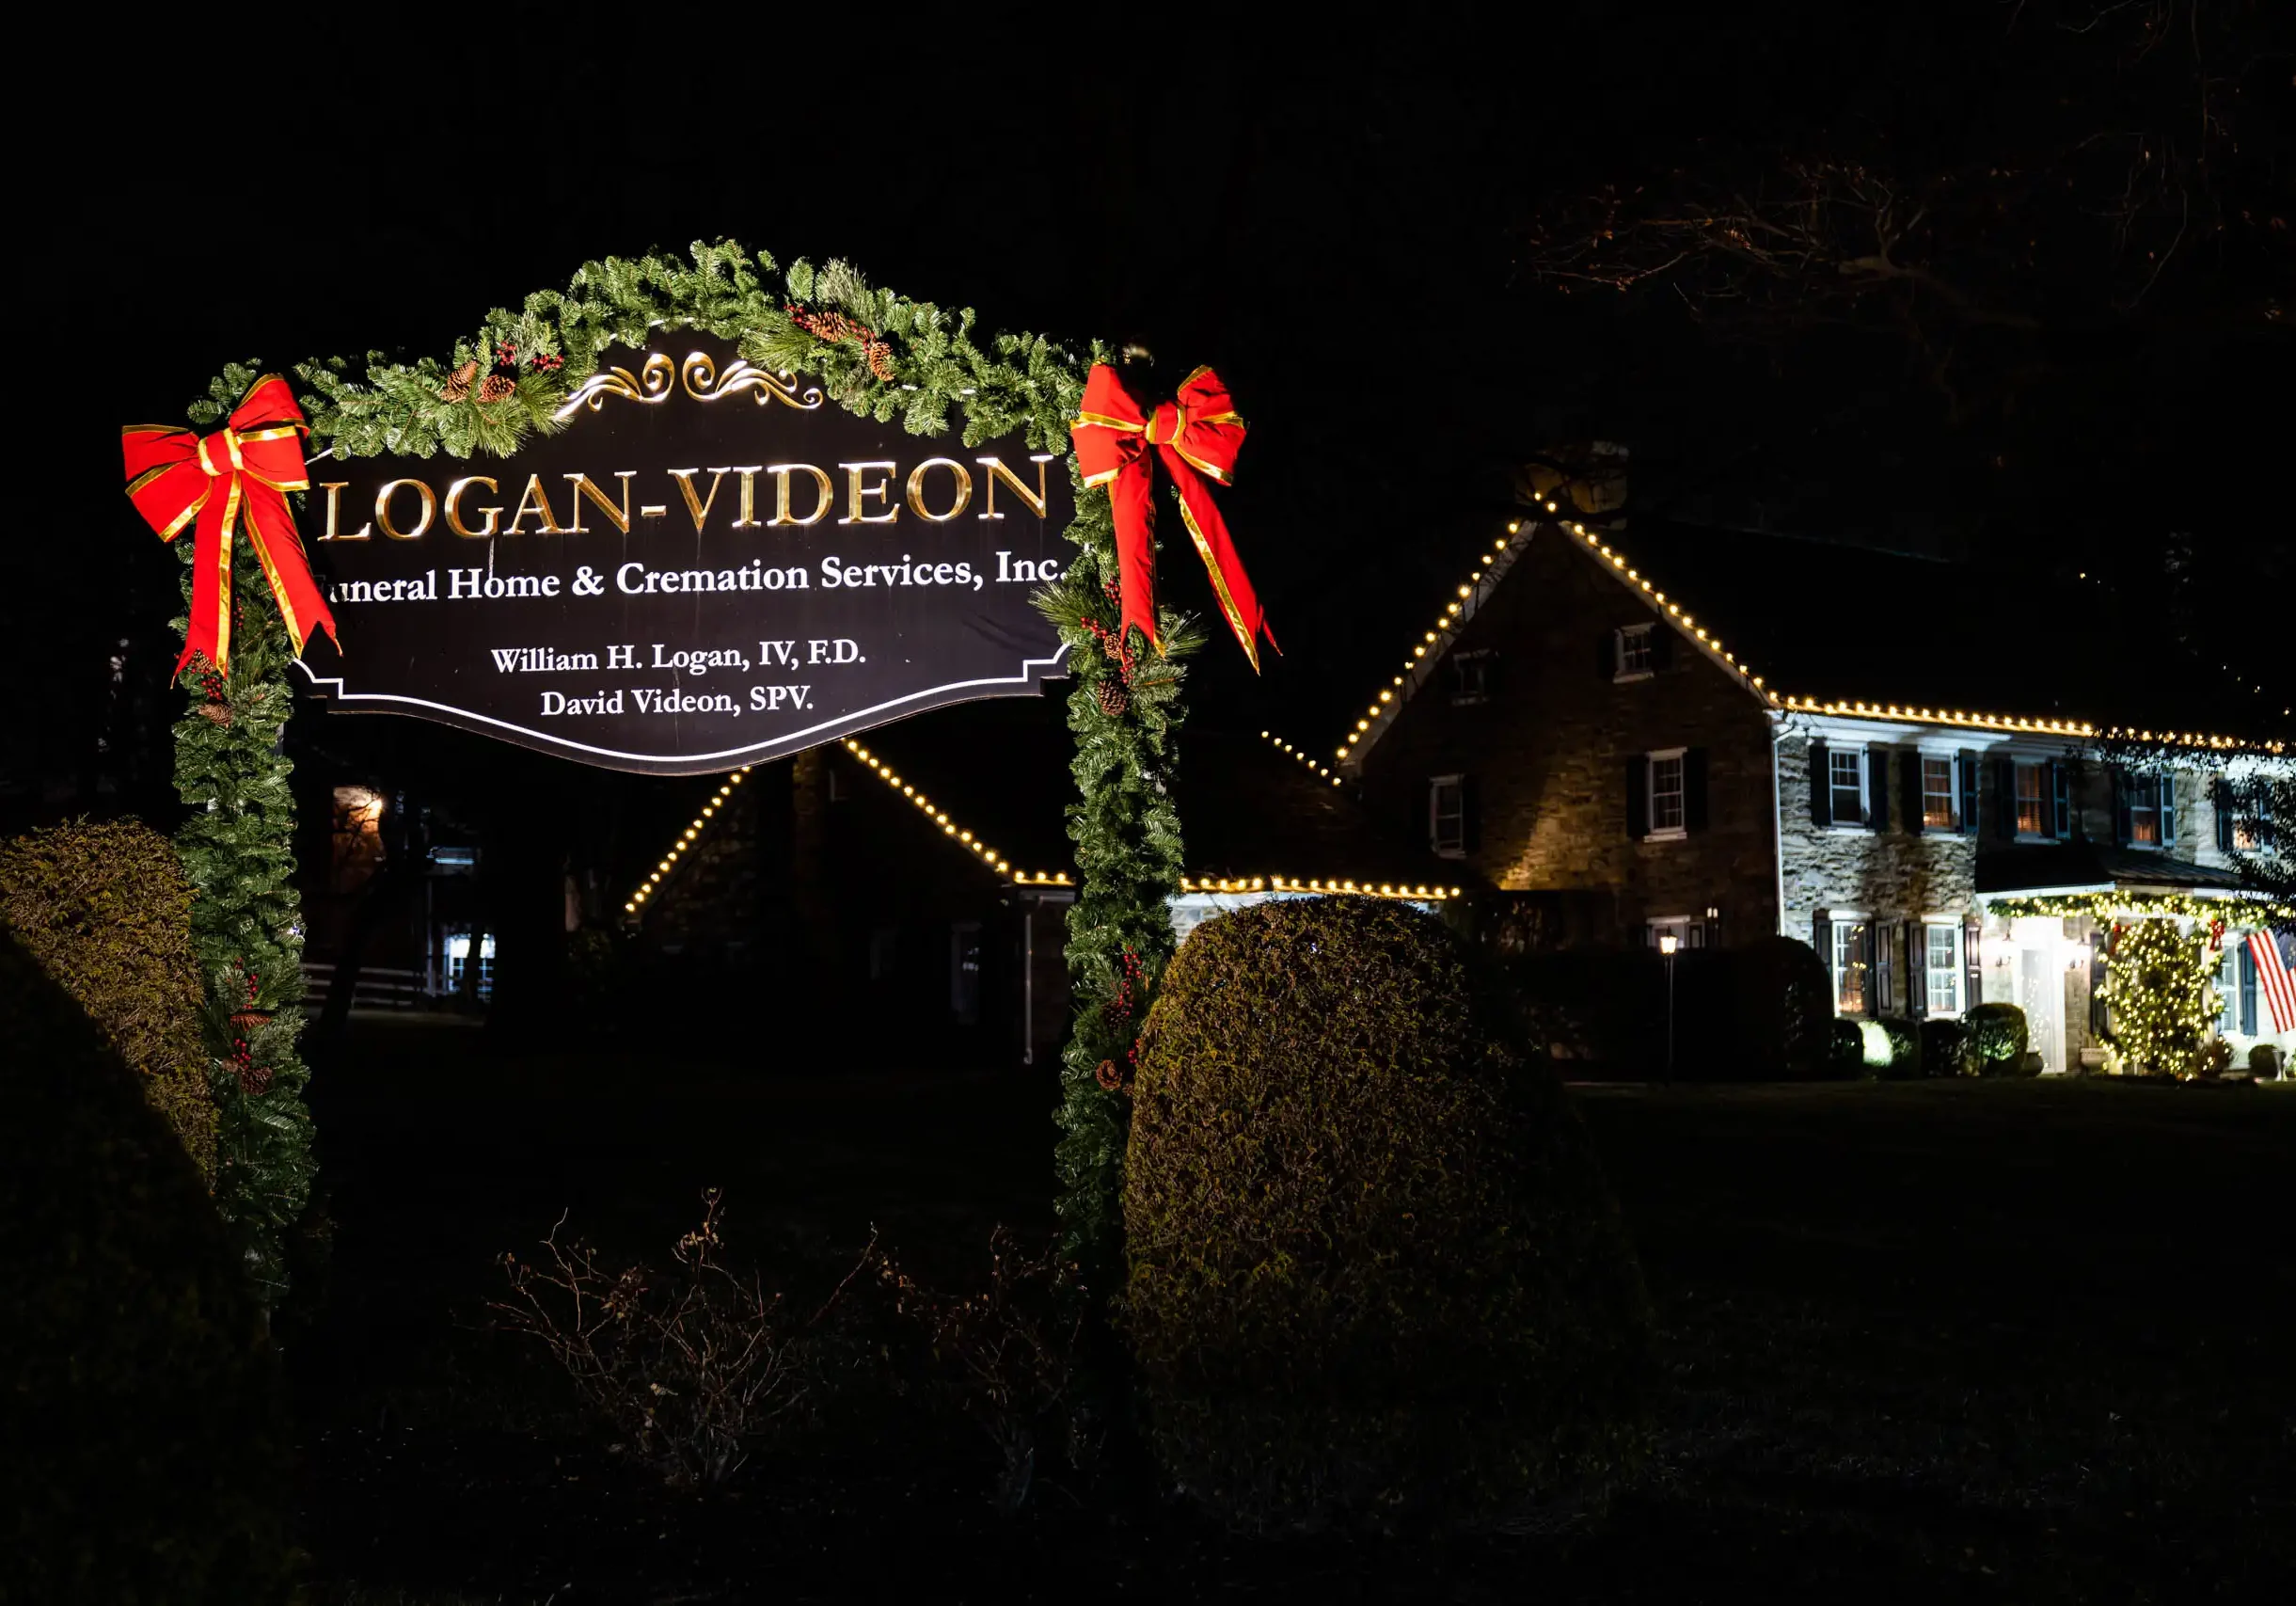 West Chester, PA Commercial Christmas Decor Services